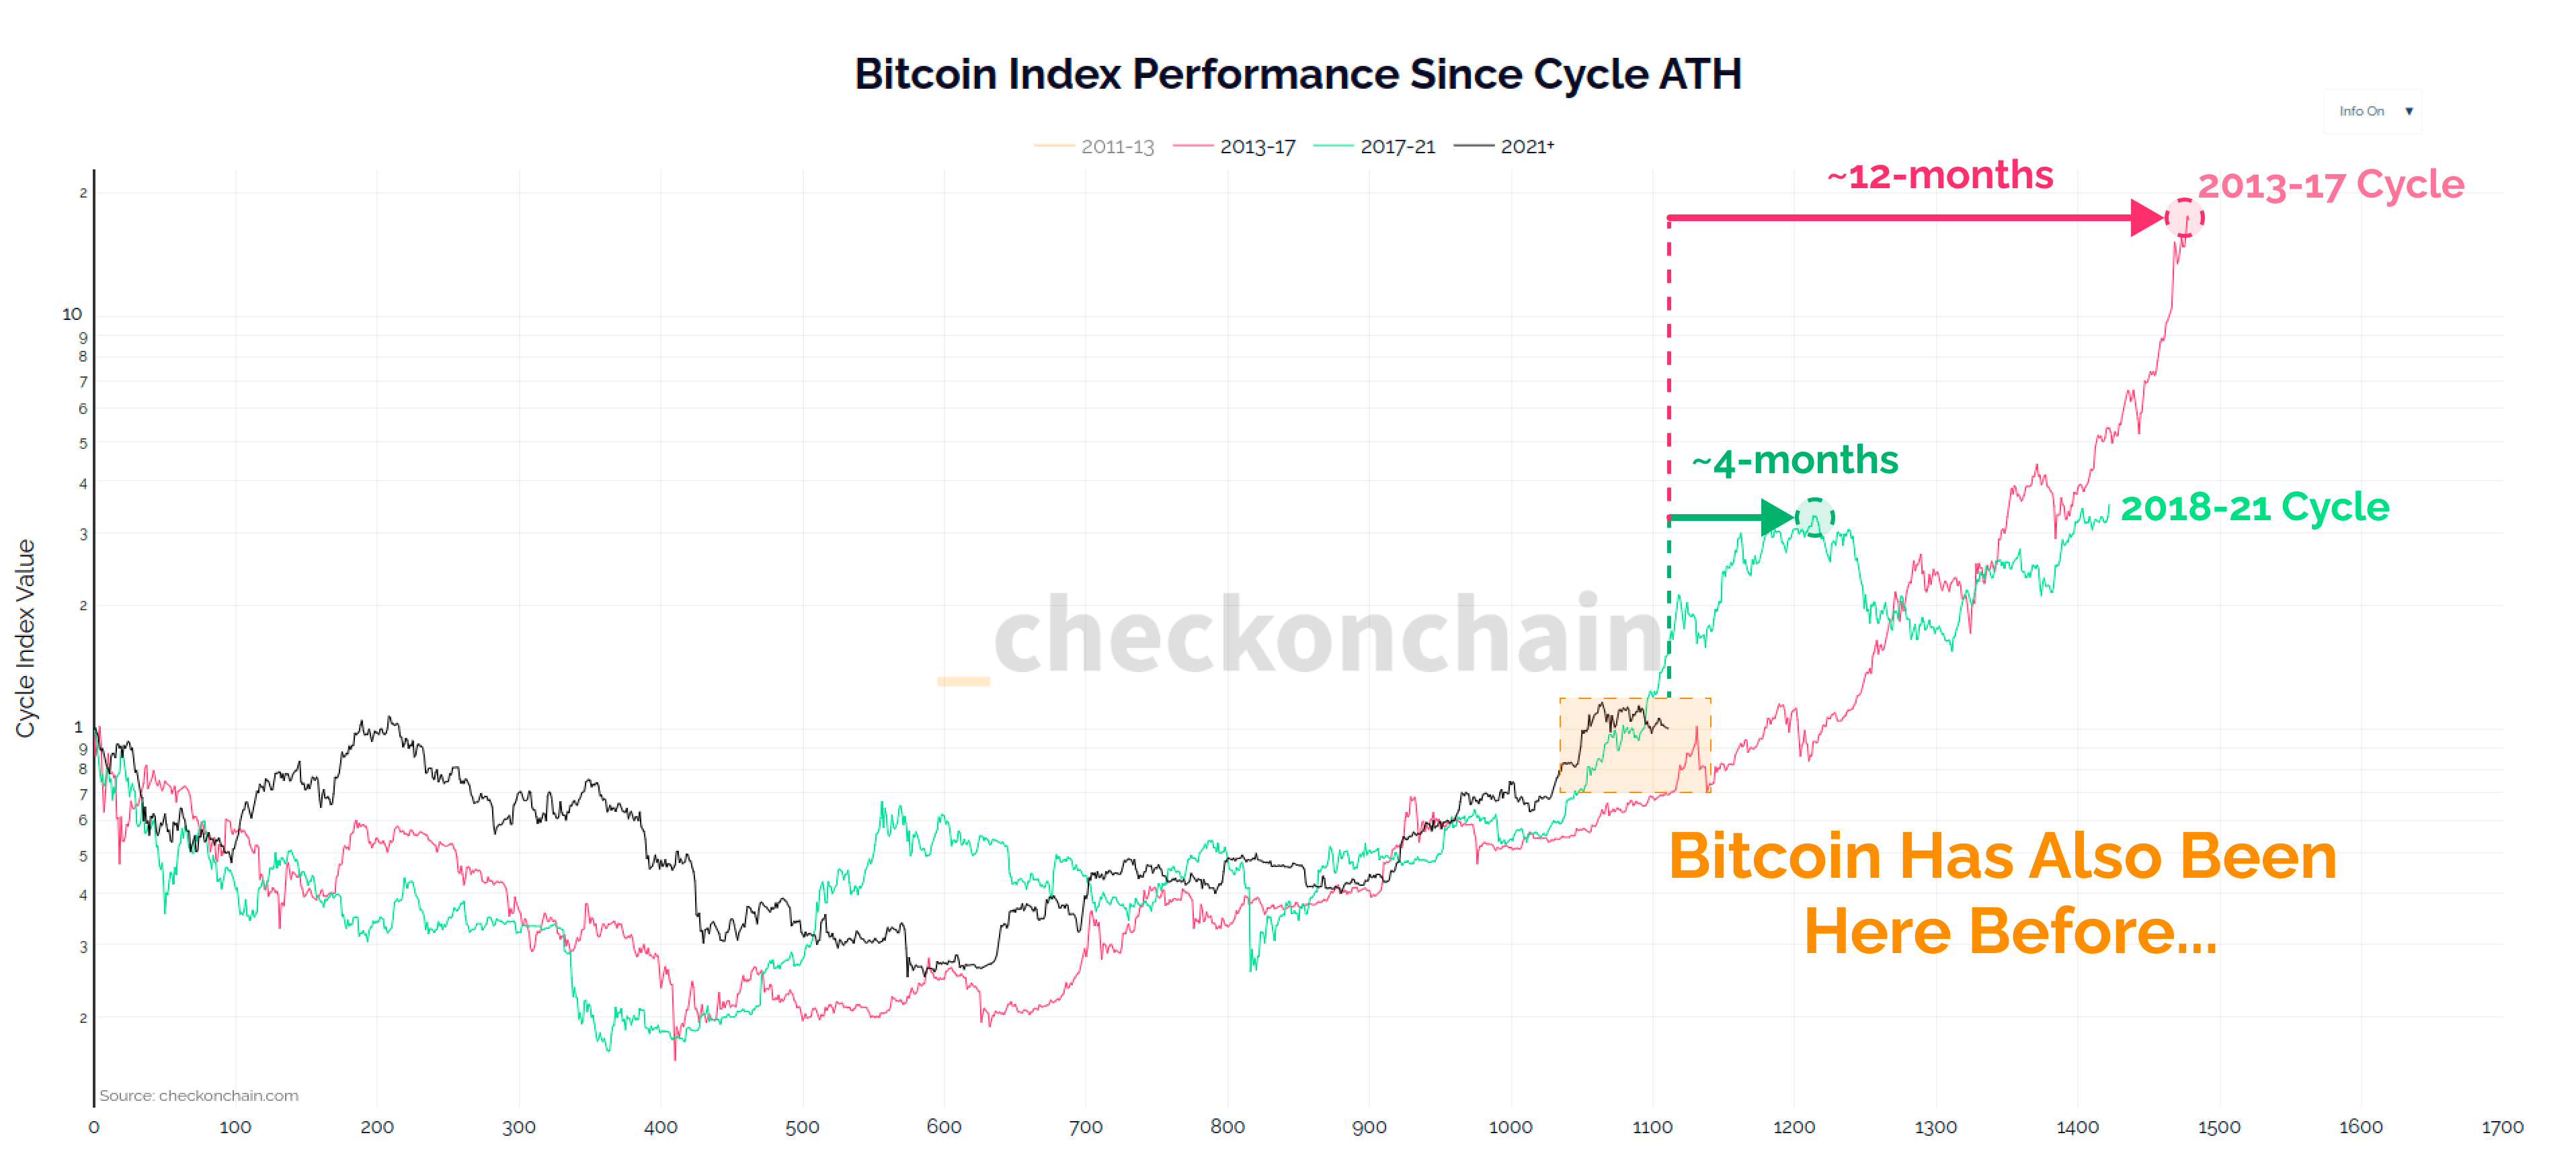 Bitcoin Index Performance Since Cycle ATH